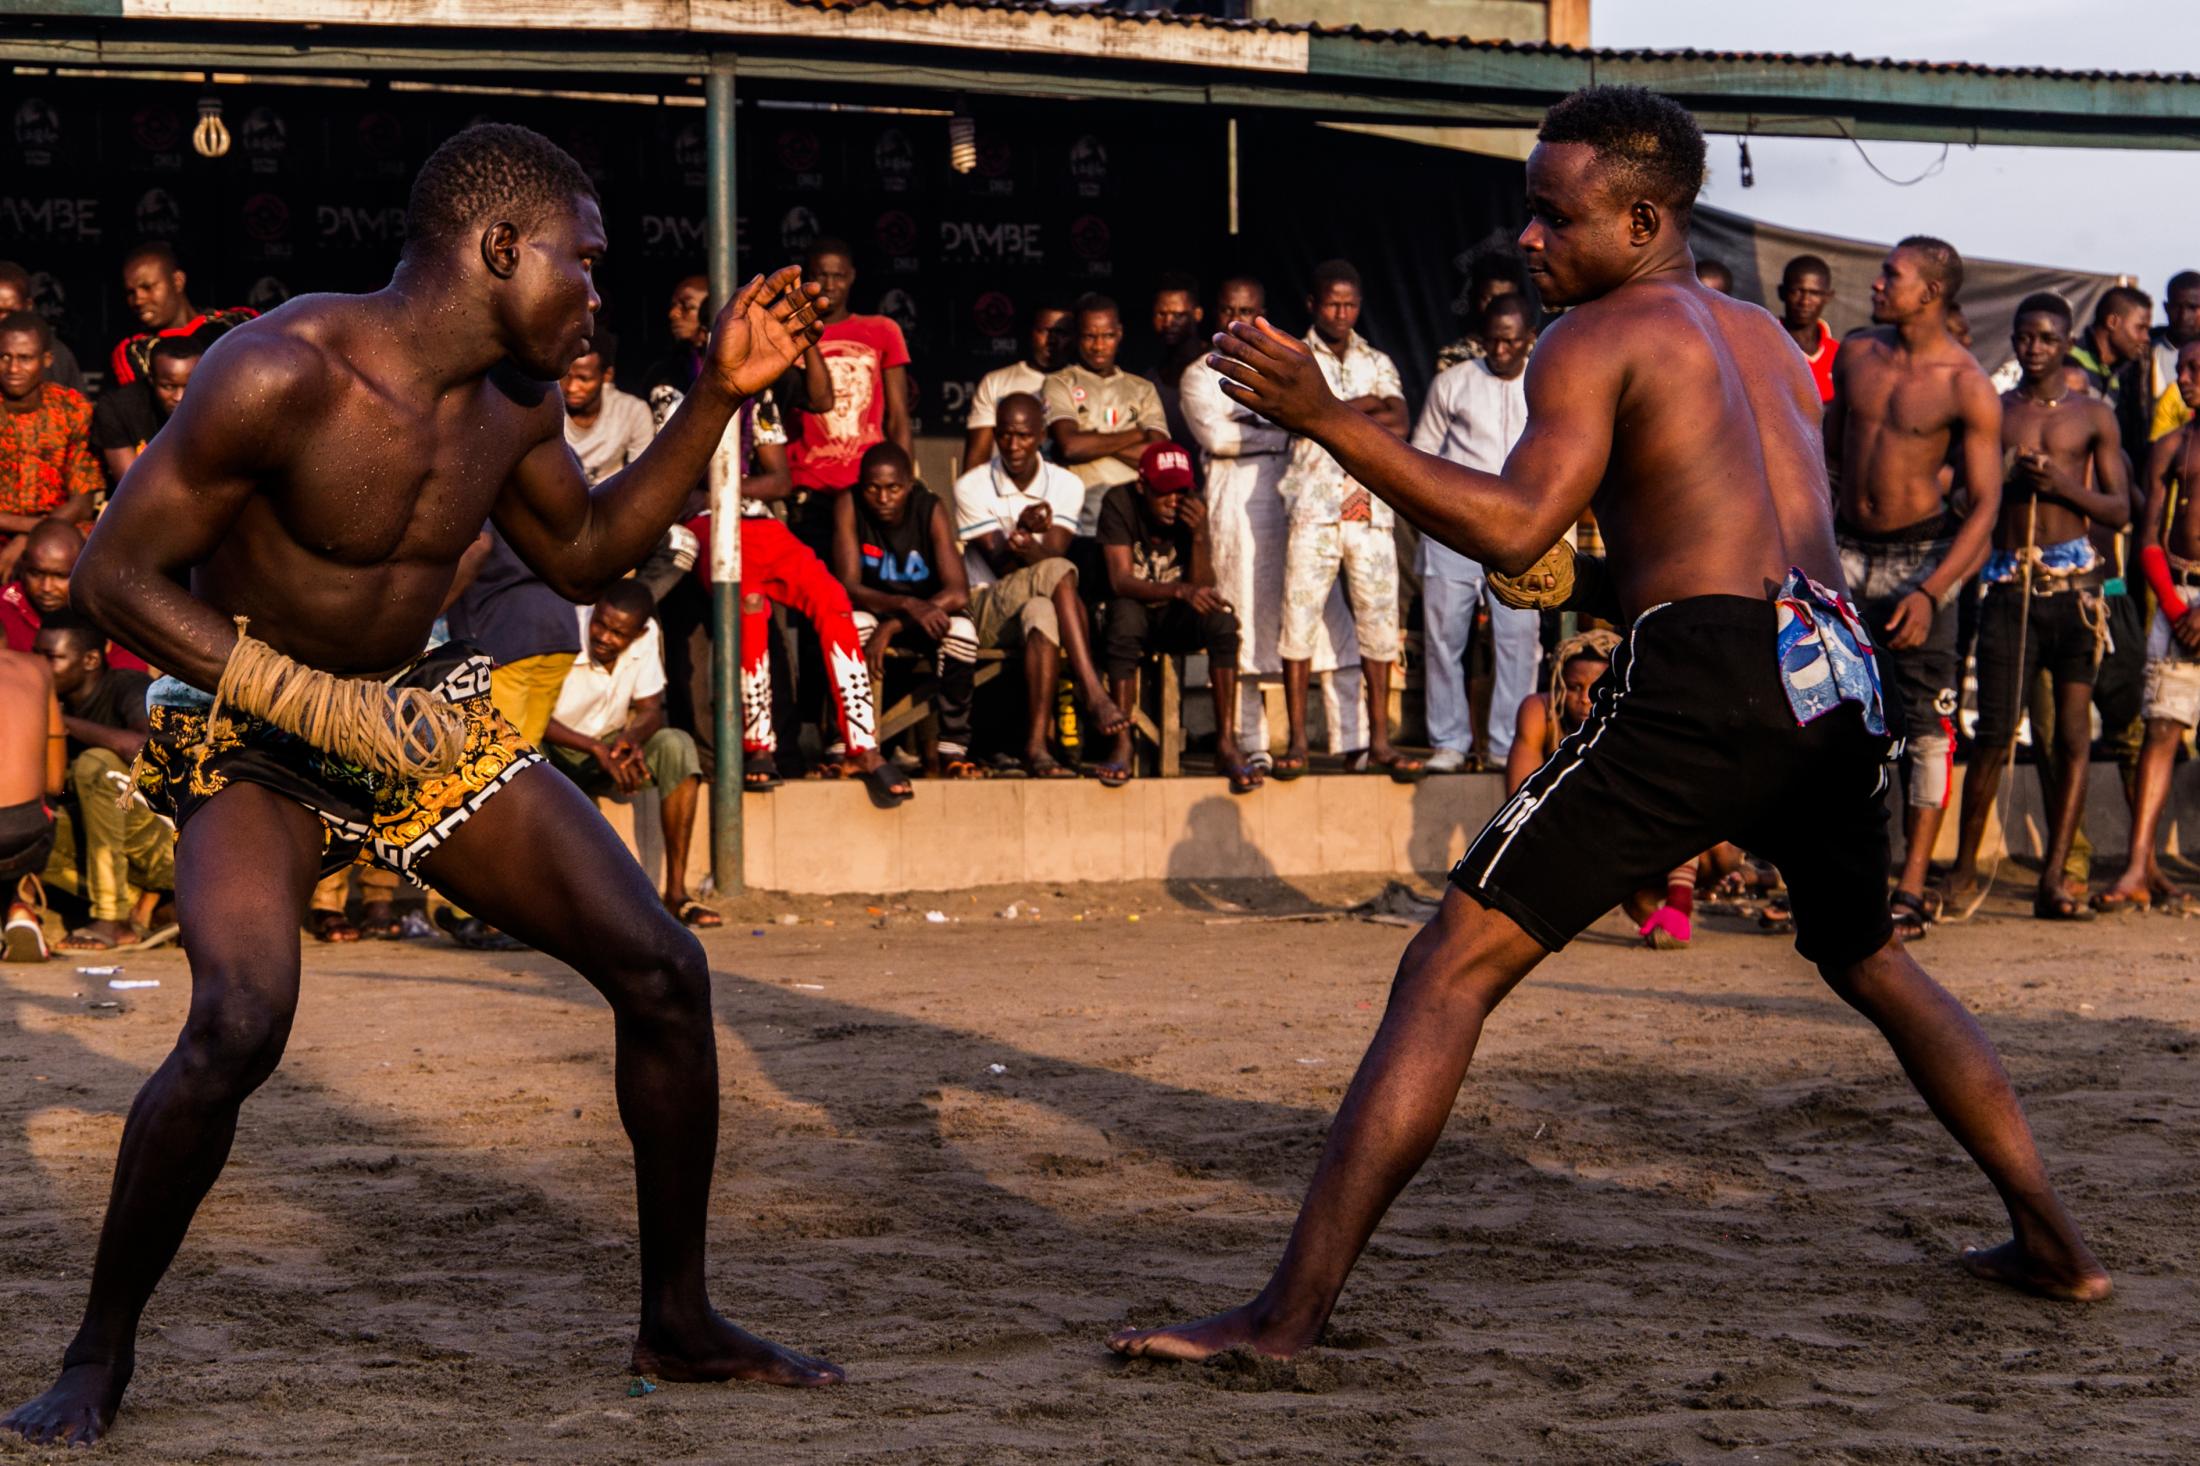 Female Boxing in Nigeria - 11 July 2019: Dambe fighters about to fight, Lagos, Nigeria